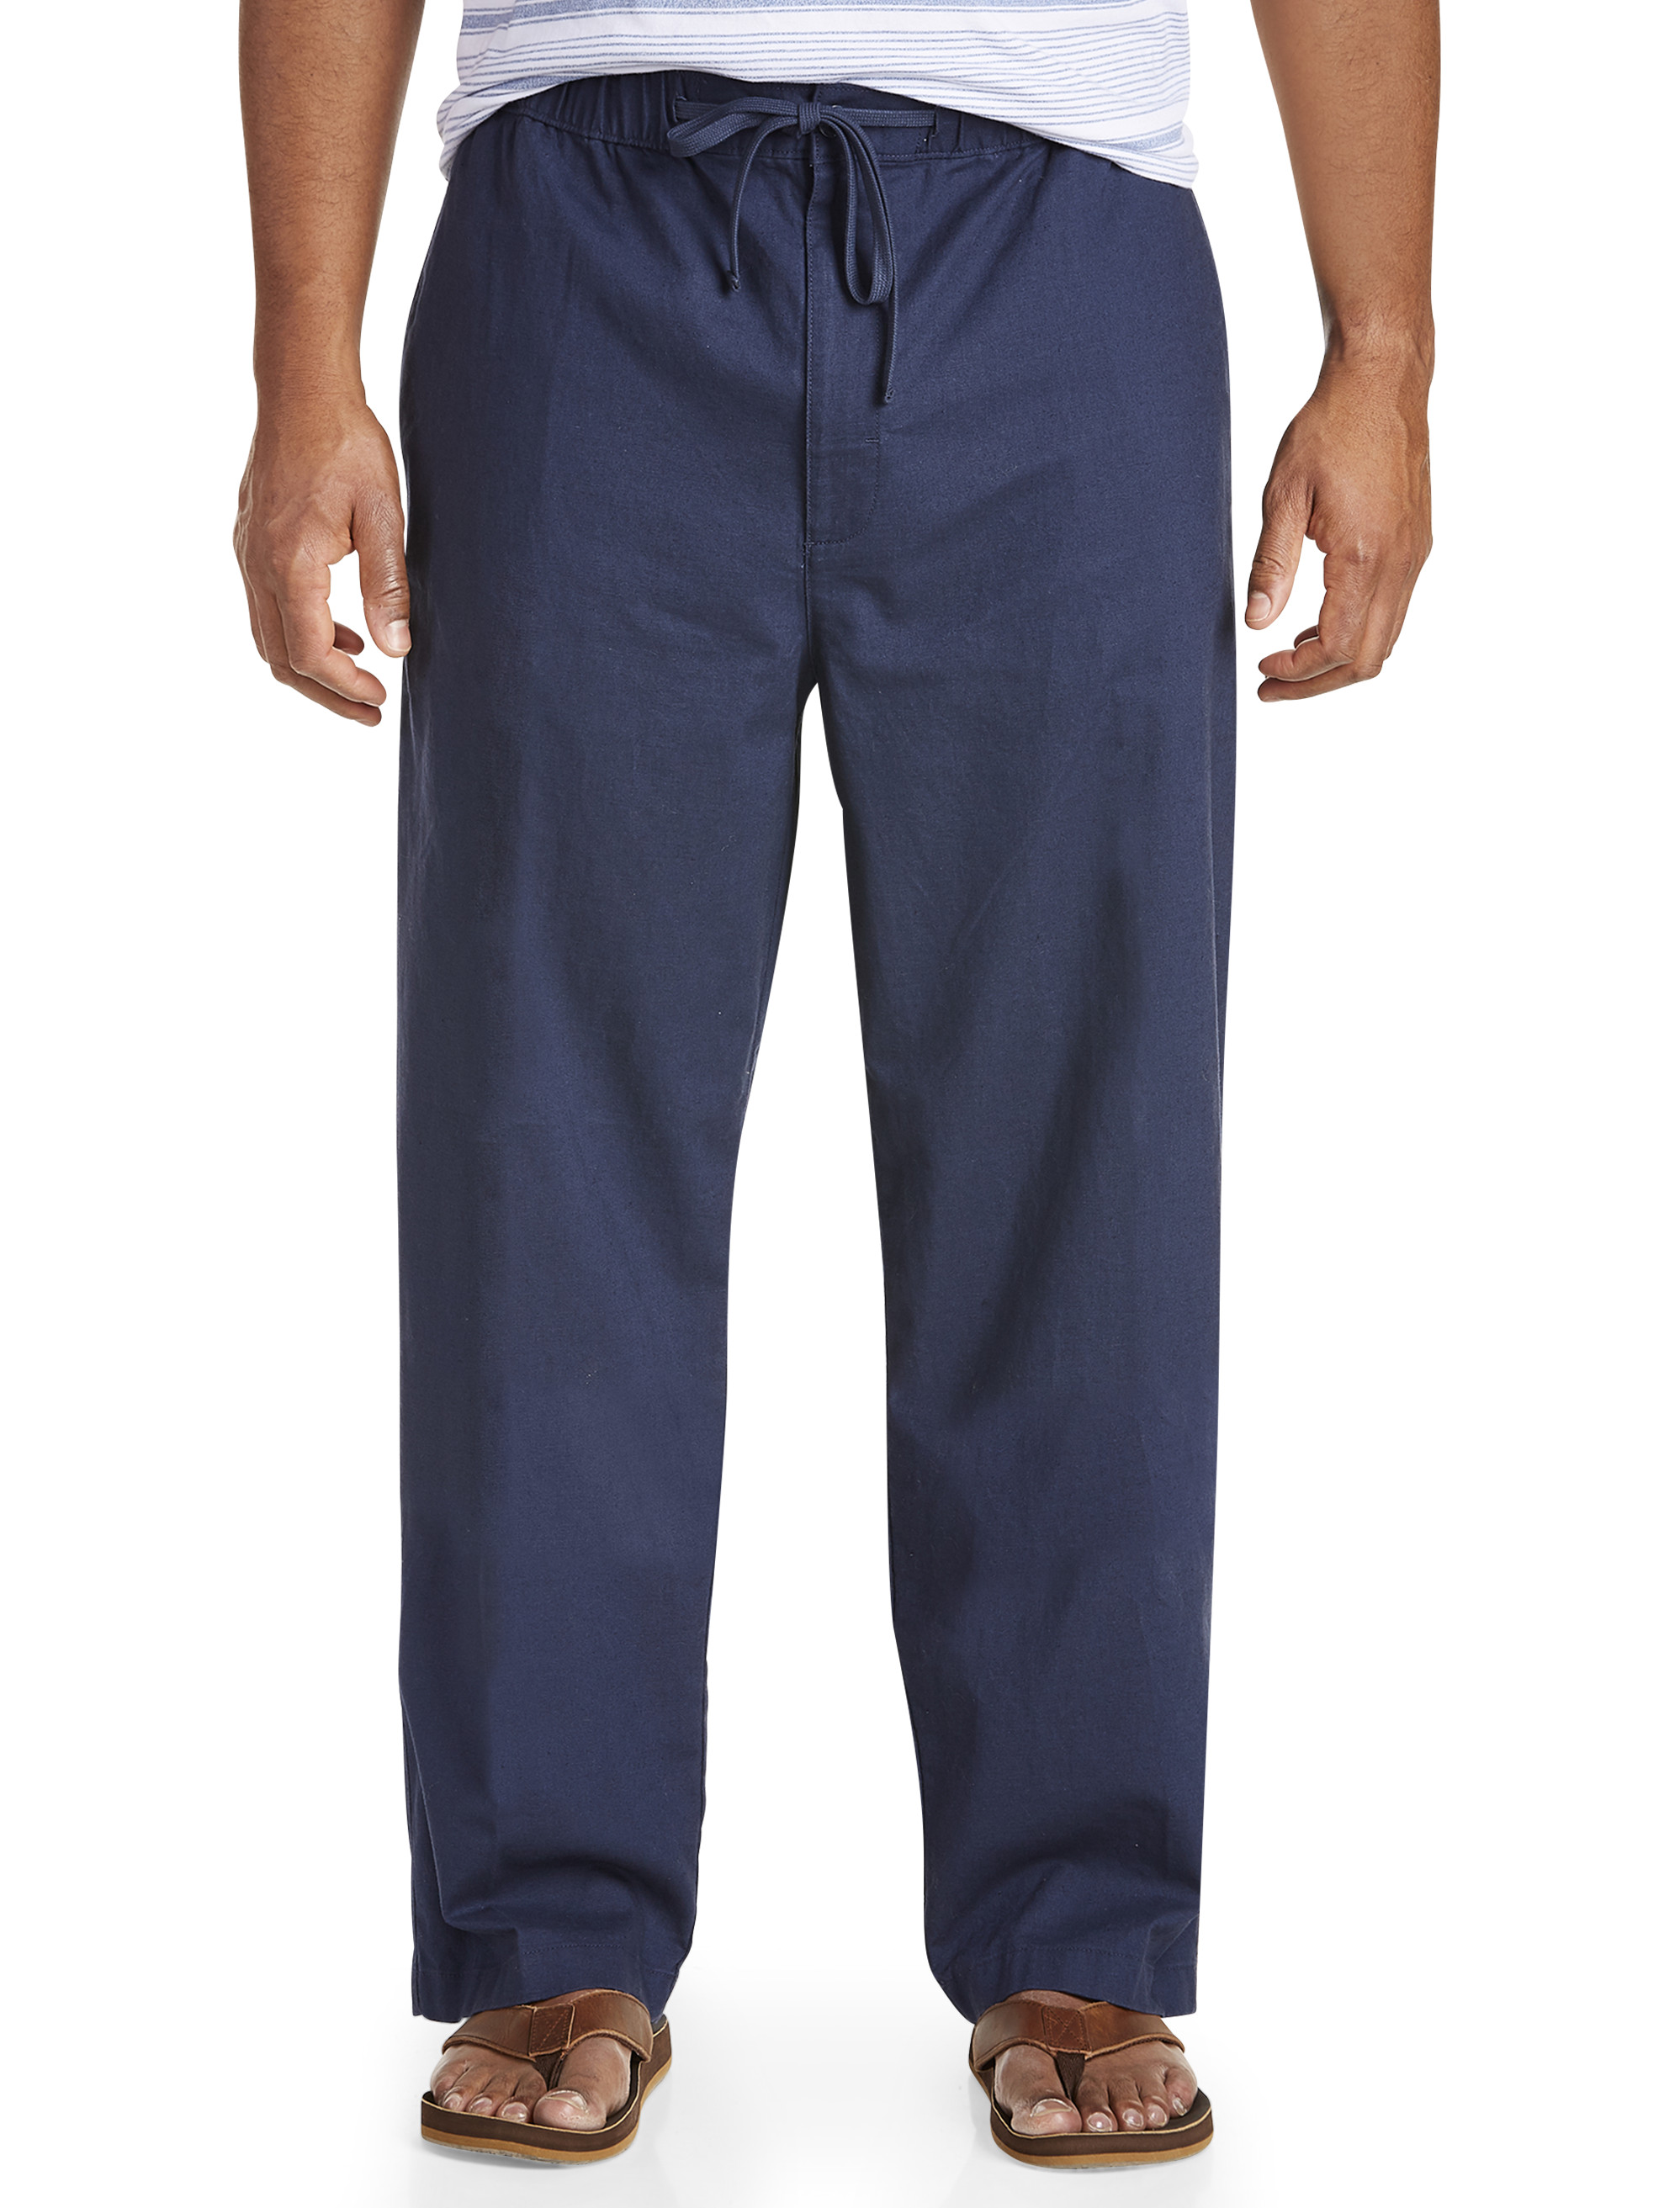 Drawstring Pants for Men. Linen Look. Runs One size Small.